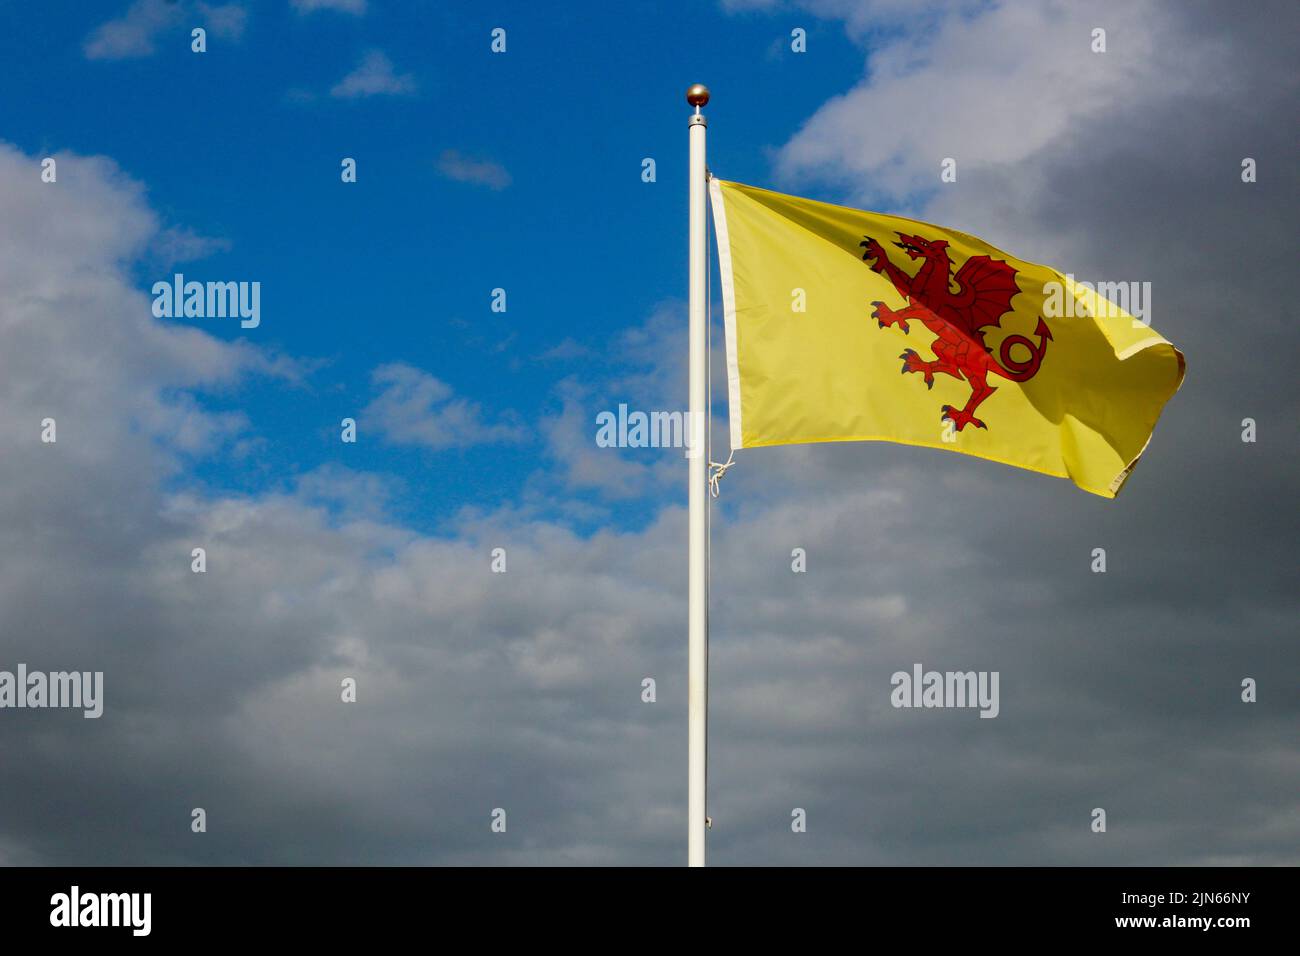 the county council flag of somerset flying on a summers day Stock Photo